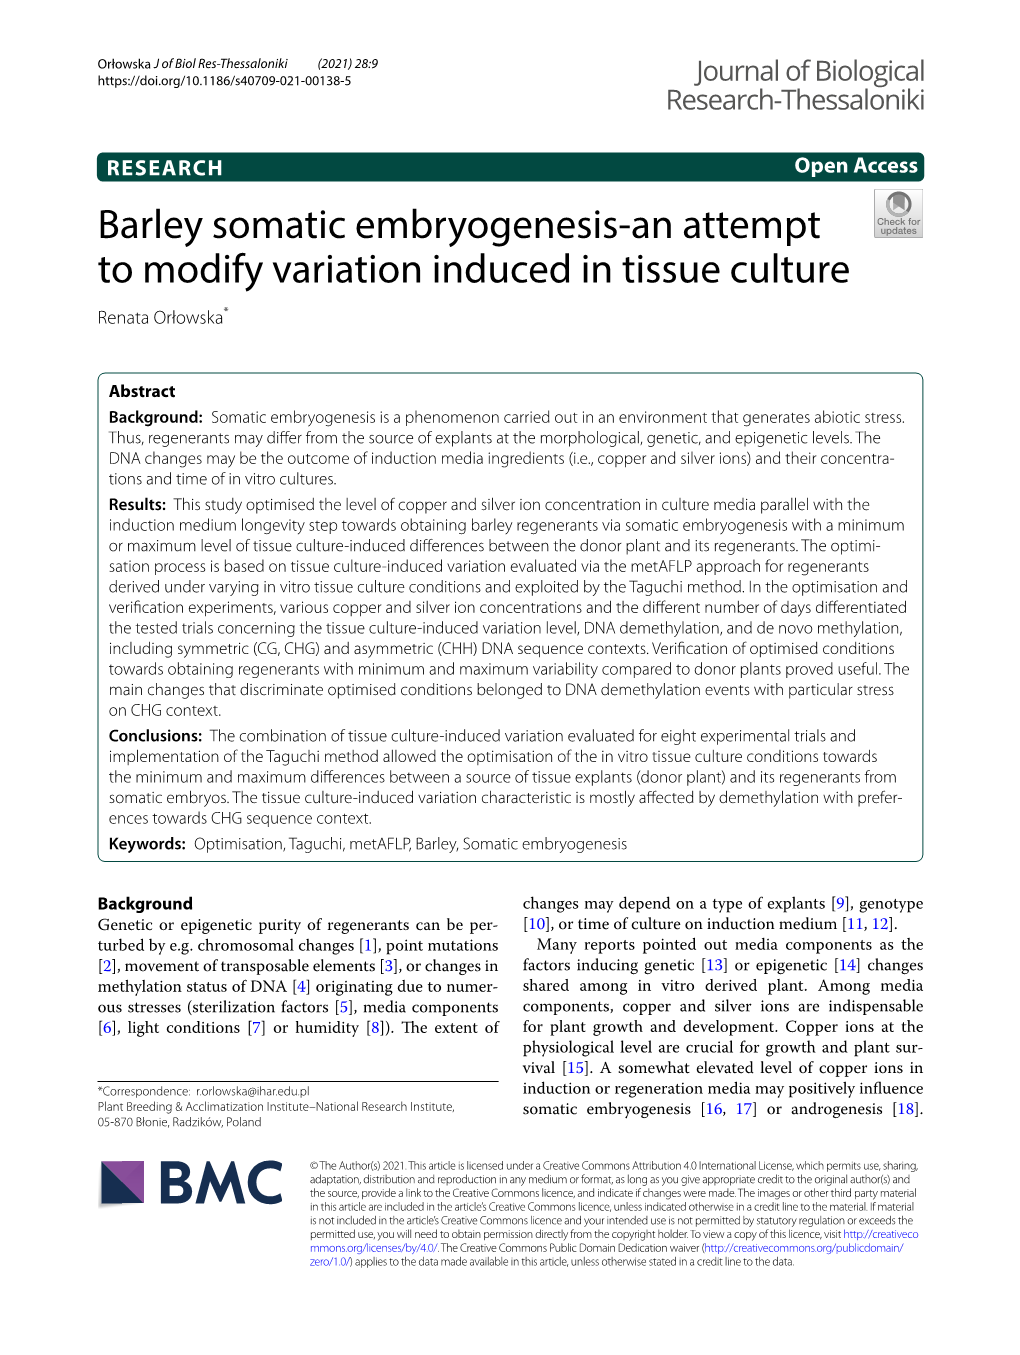 Barley Somatic Embryogenesis-An Attempt to Modify Variation Induced